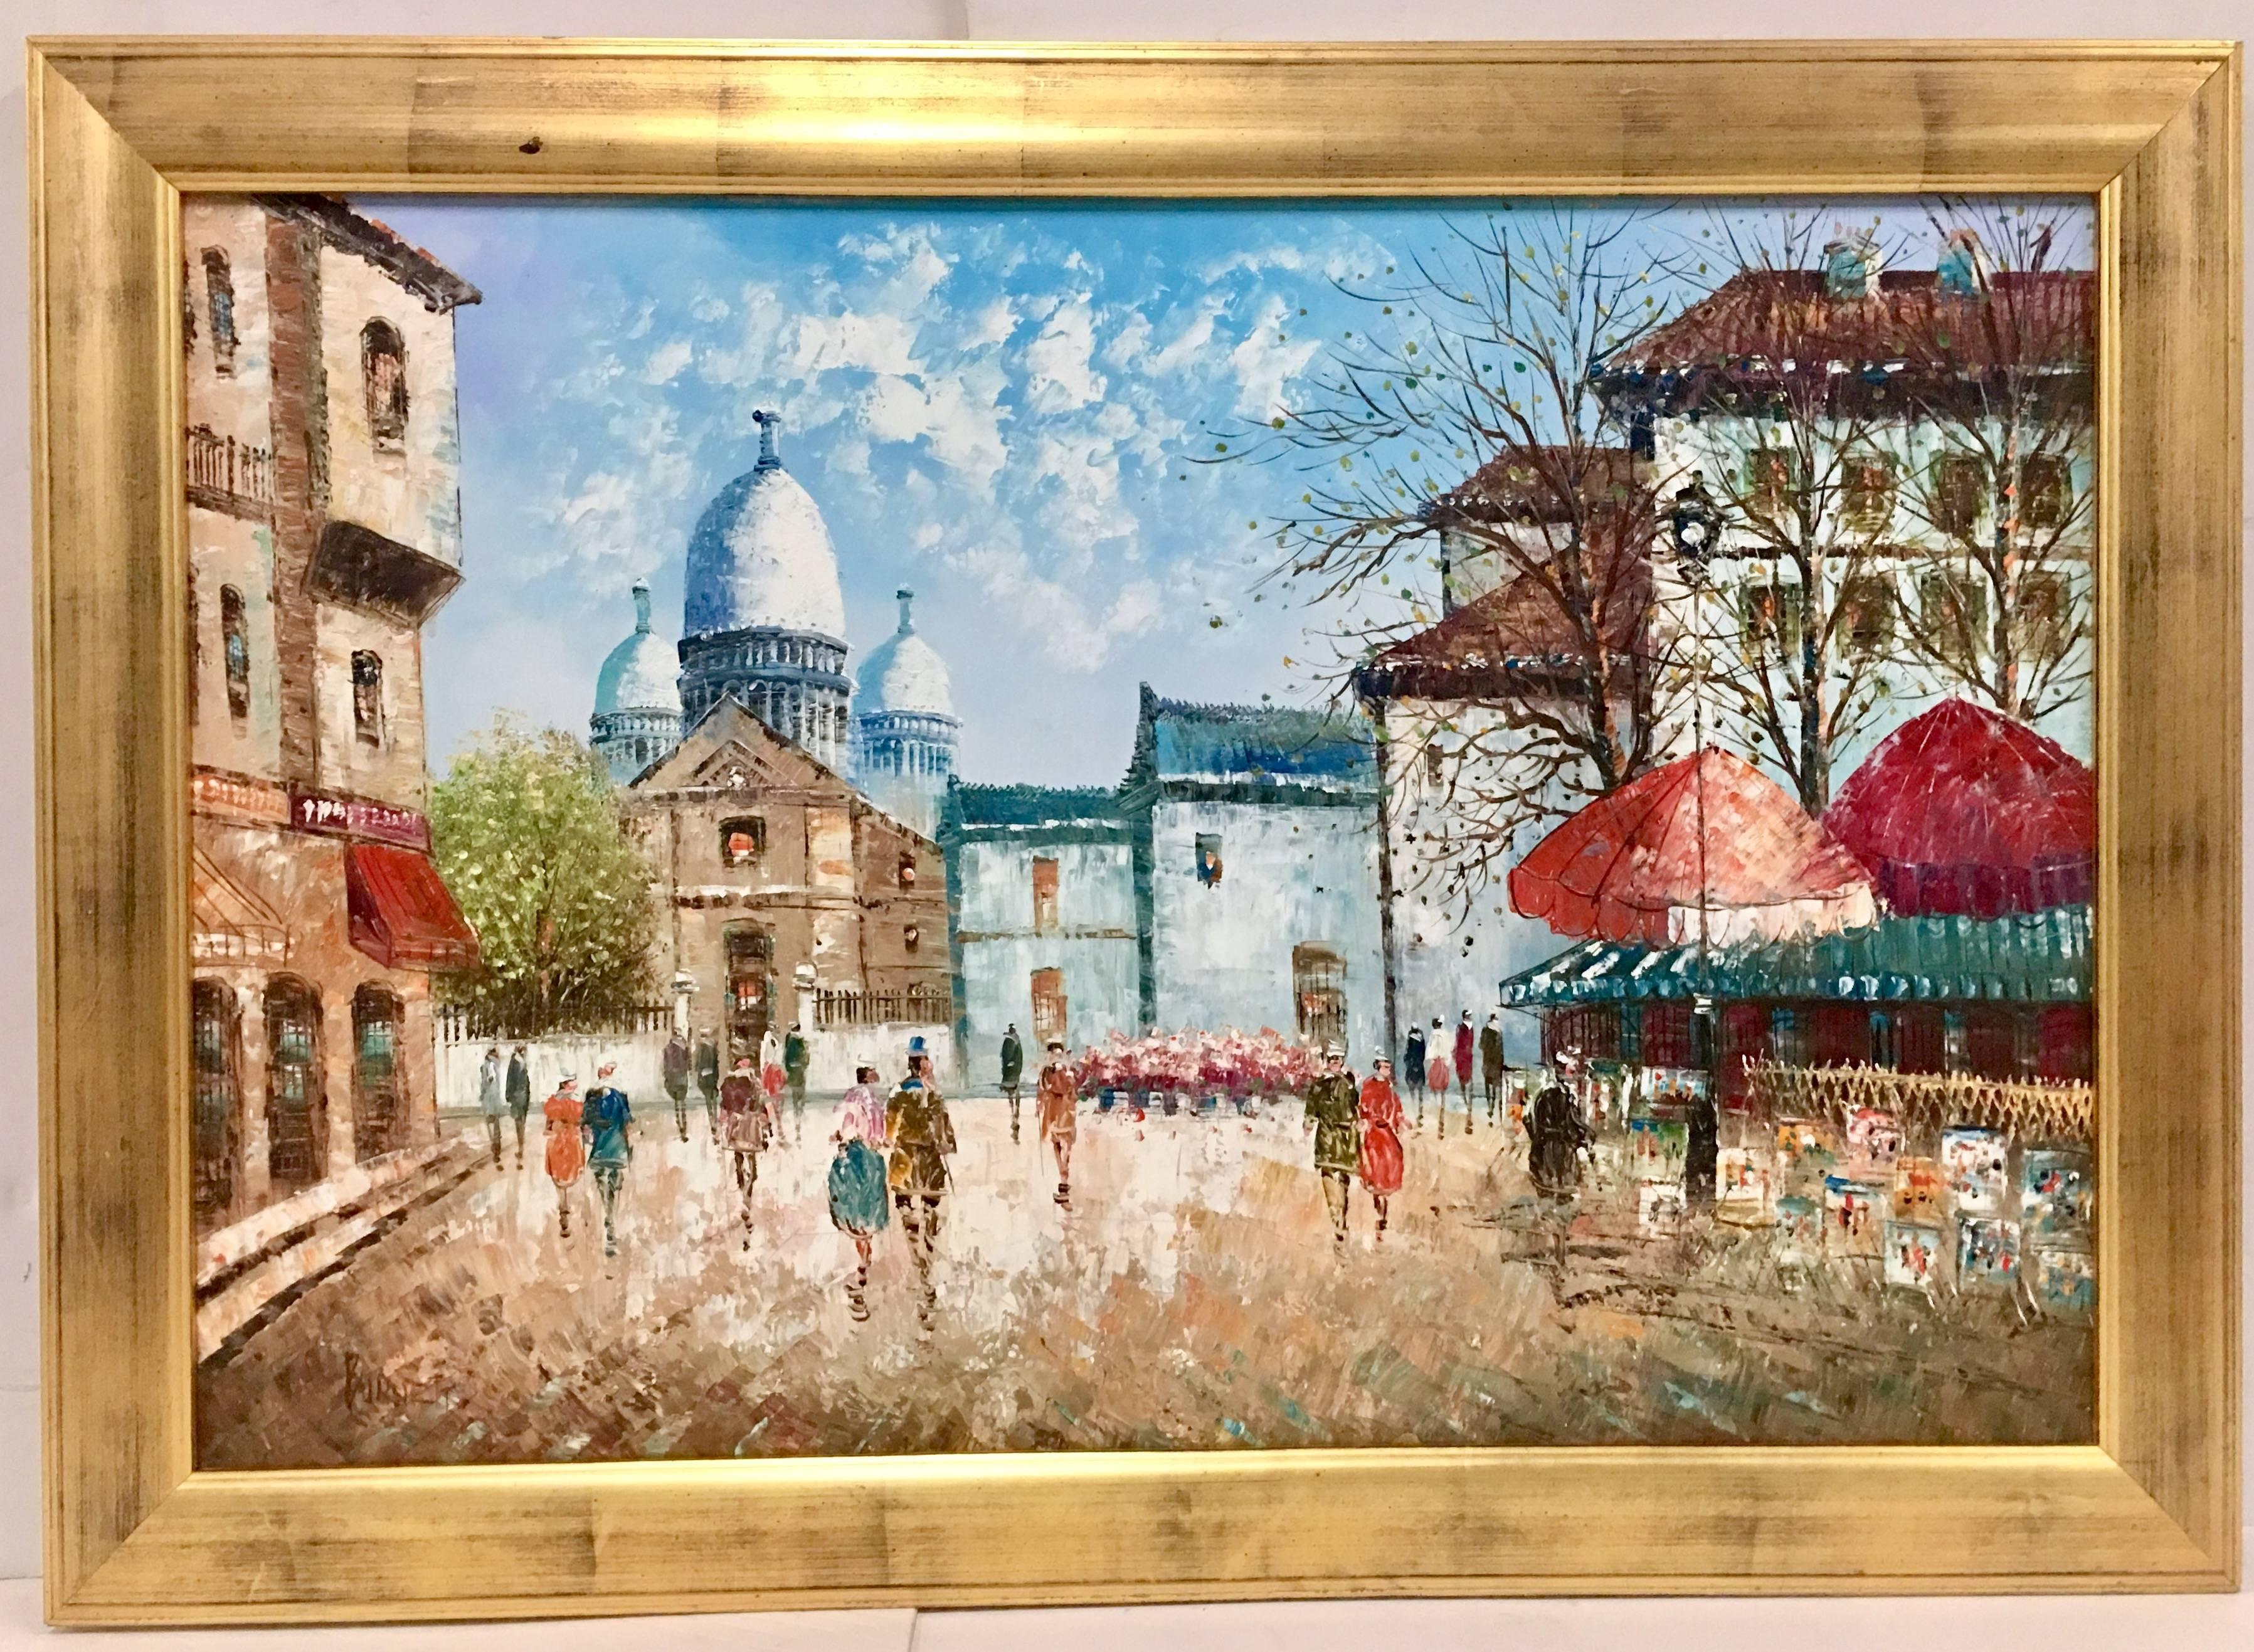 Mid-Century Original Oil On Canvas Painting & Gilt Wood Frame Signed, Burnett. This Impressionist Paris Street Scene Near the Sacre Coeur, painting features a vivid and cheerful color palette and depicts 